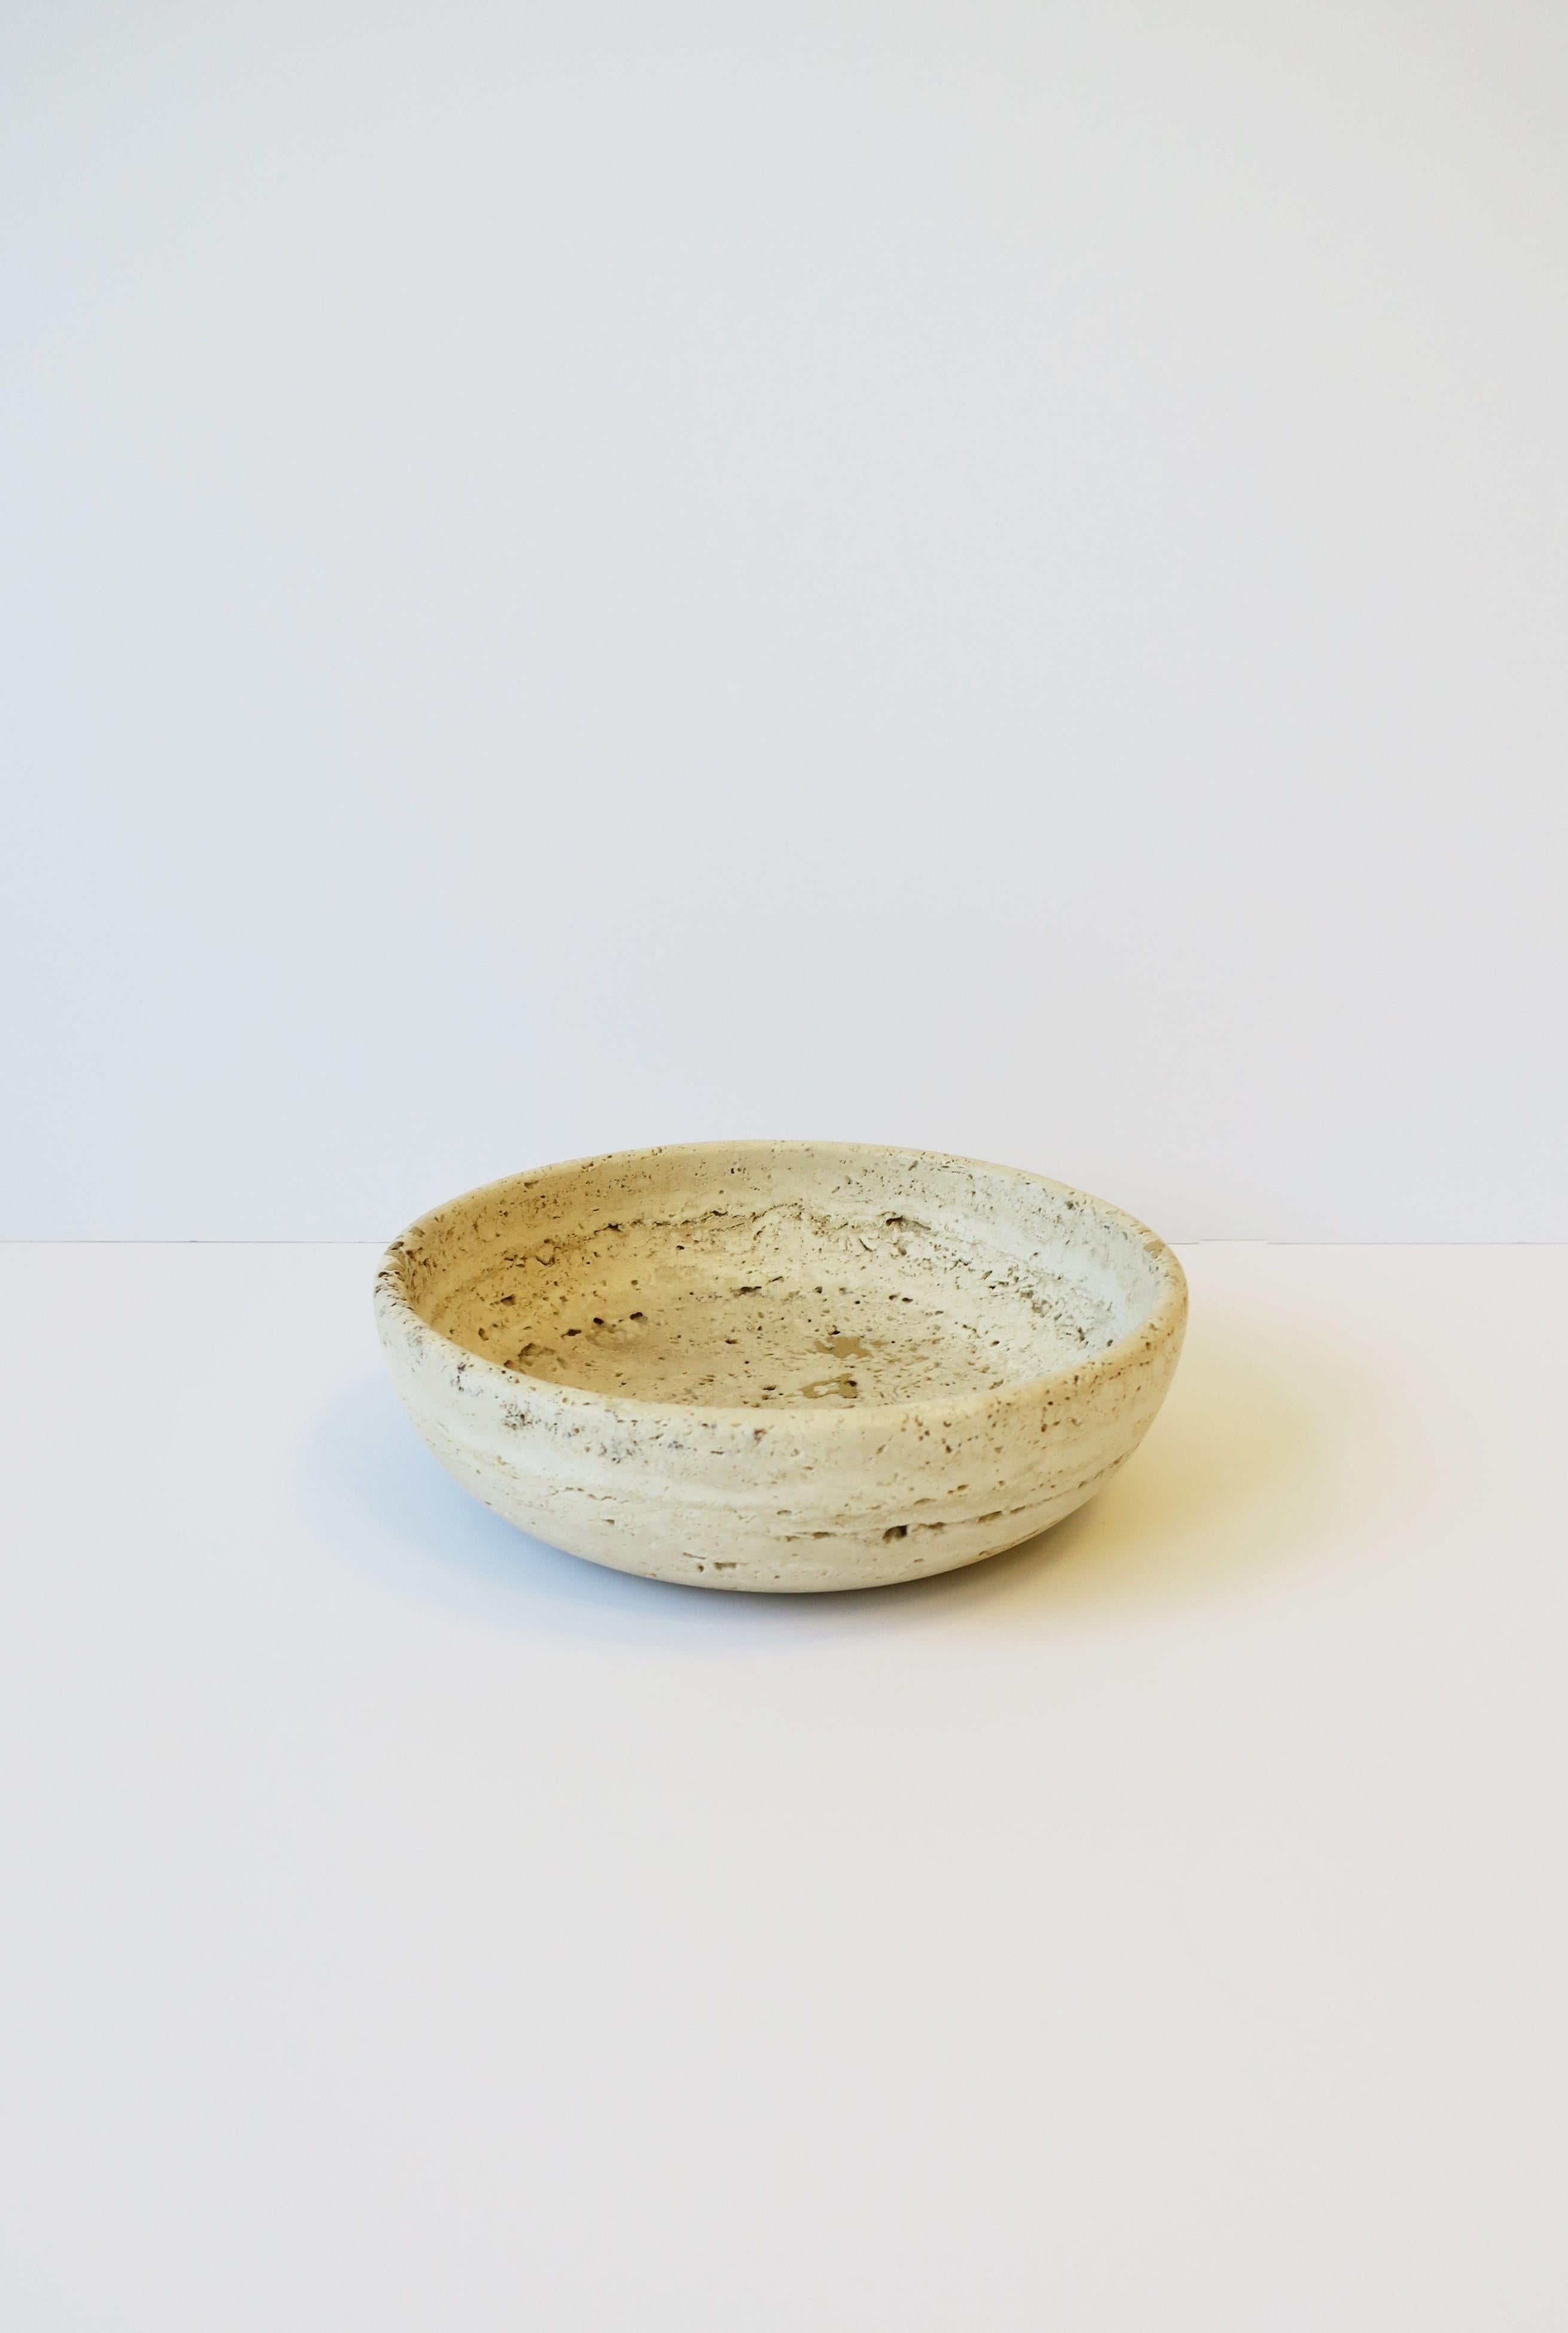 Modern Italian Travertine Marble Bowl, Italy 1970s For Sale